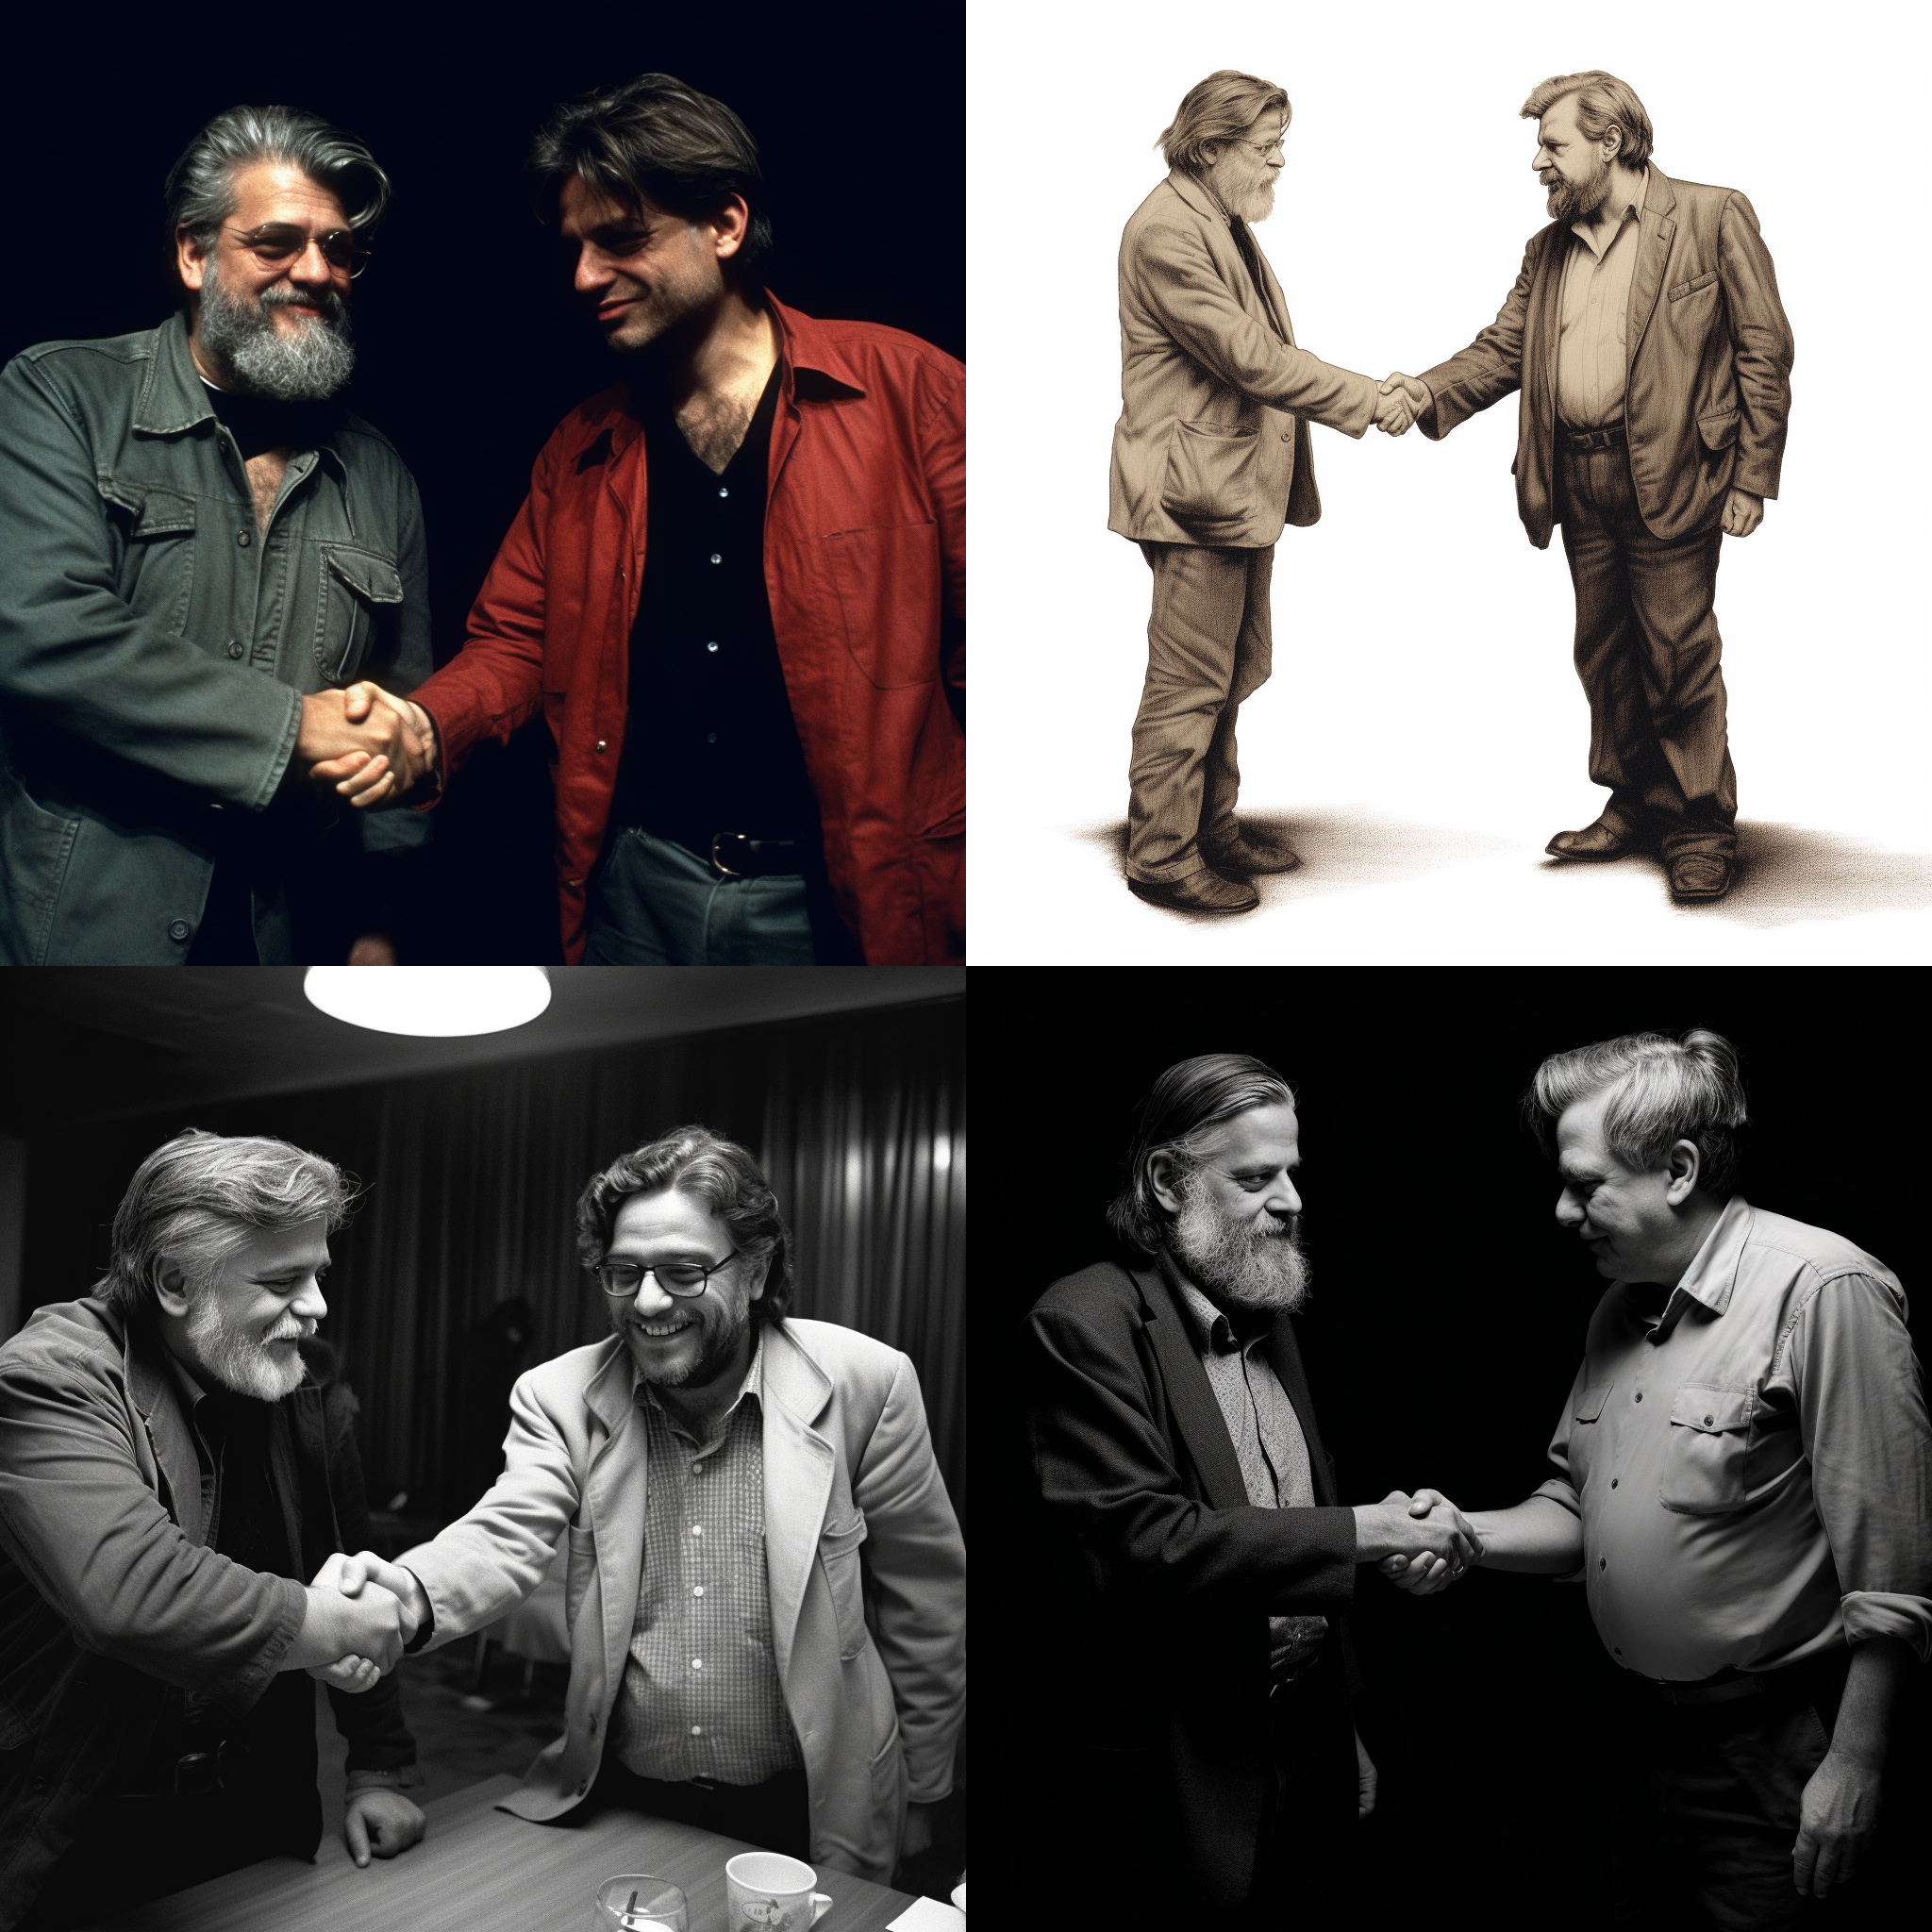 fernando172543 Lacan and Zizek handshaking and smiling 2a11e10a d81a 48ad ac0c a821308d4cd2